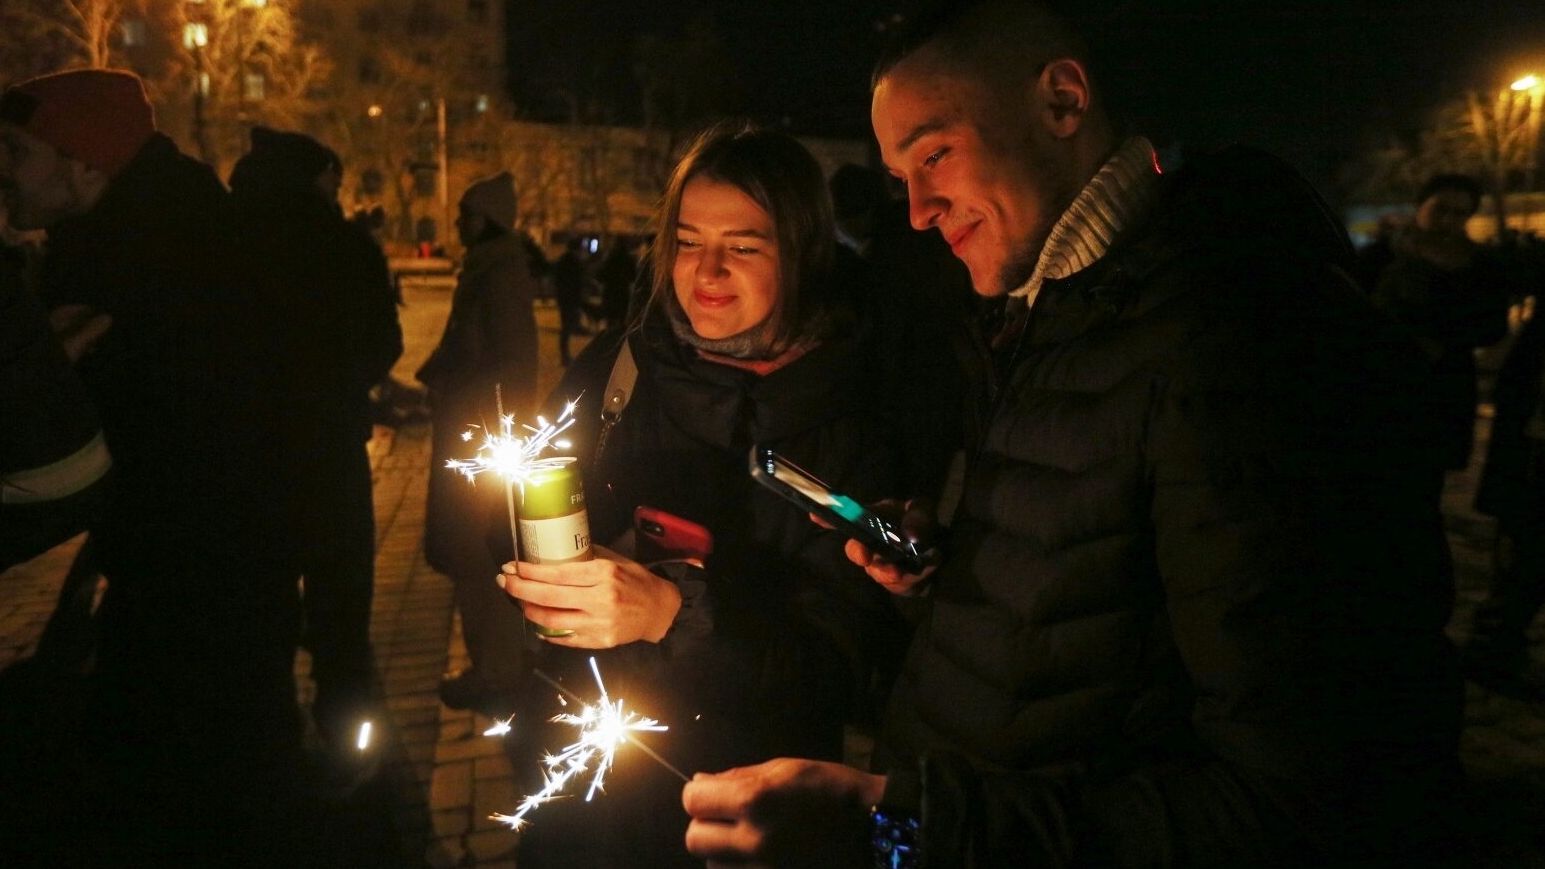 Is there a curfew and can fireworks be set off in Ukraine? What should residents of Dnipro and the region remember on New Years Eve?